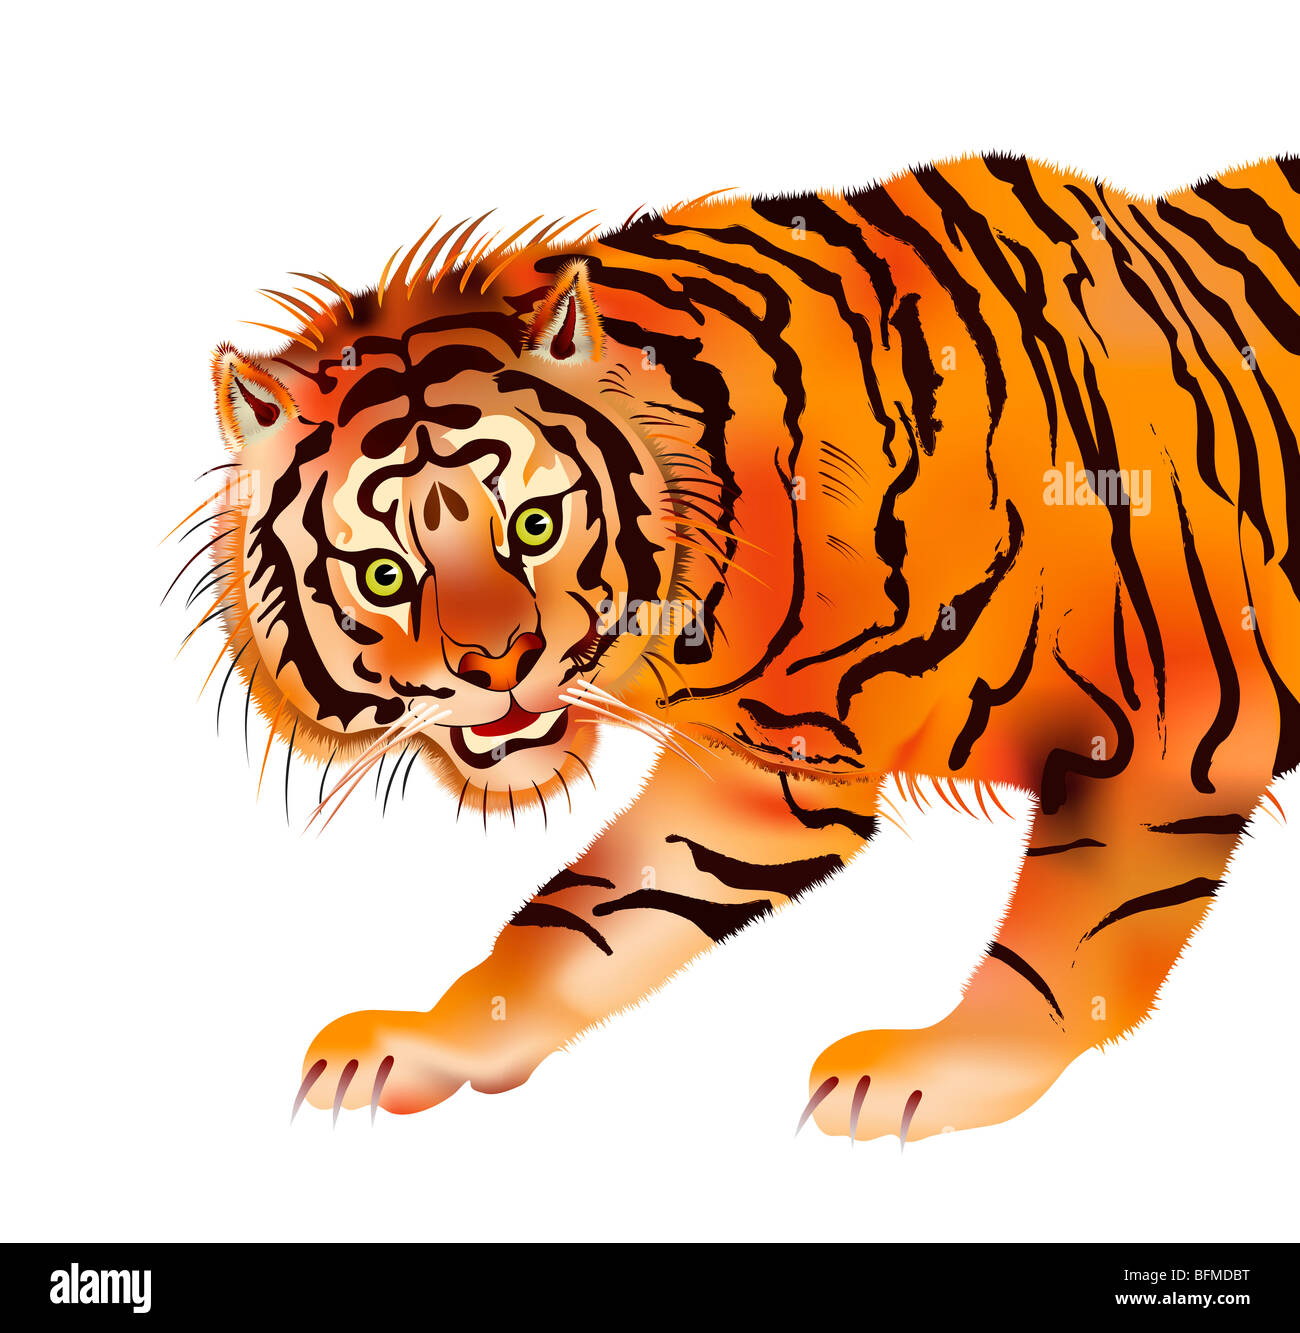 Illustration of the tiger - beast of prey Stock Photo